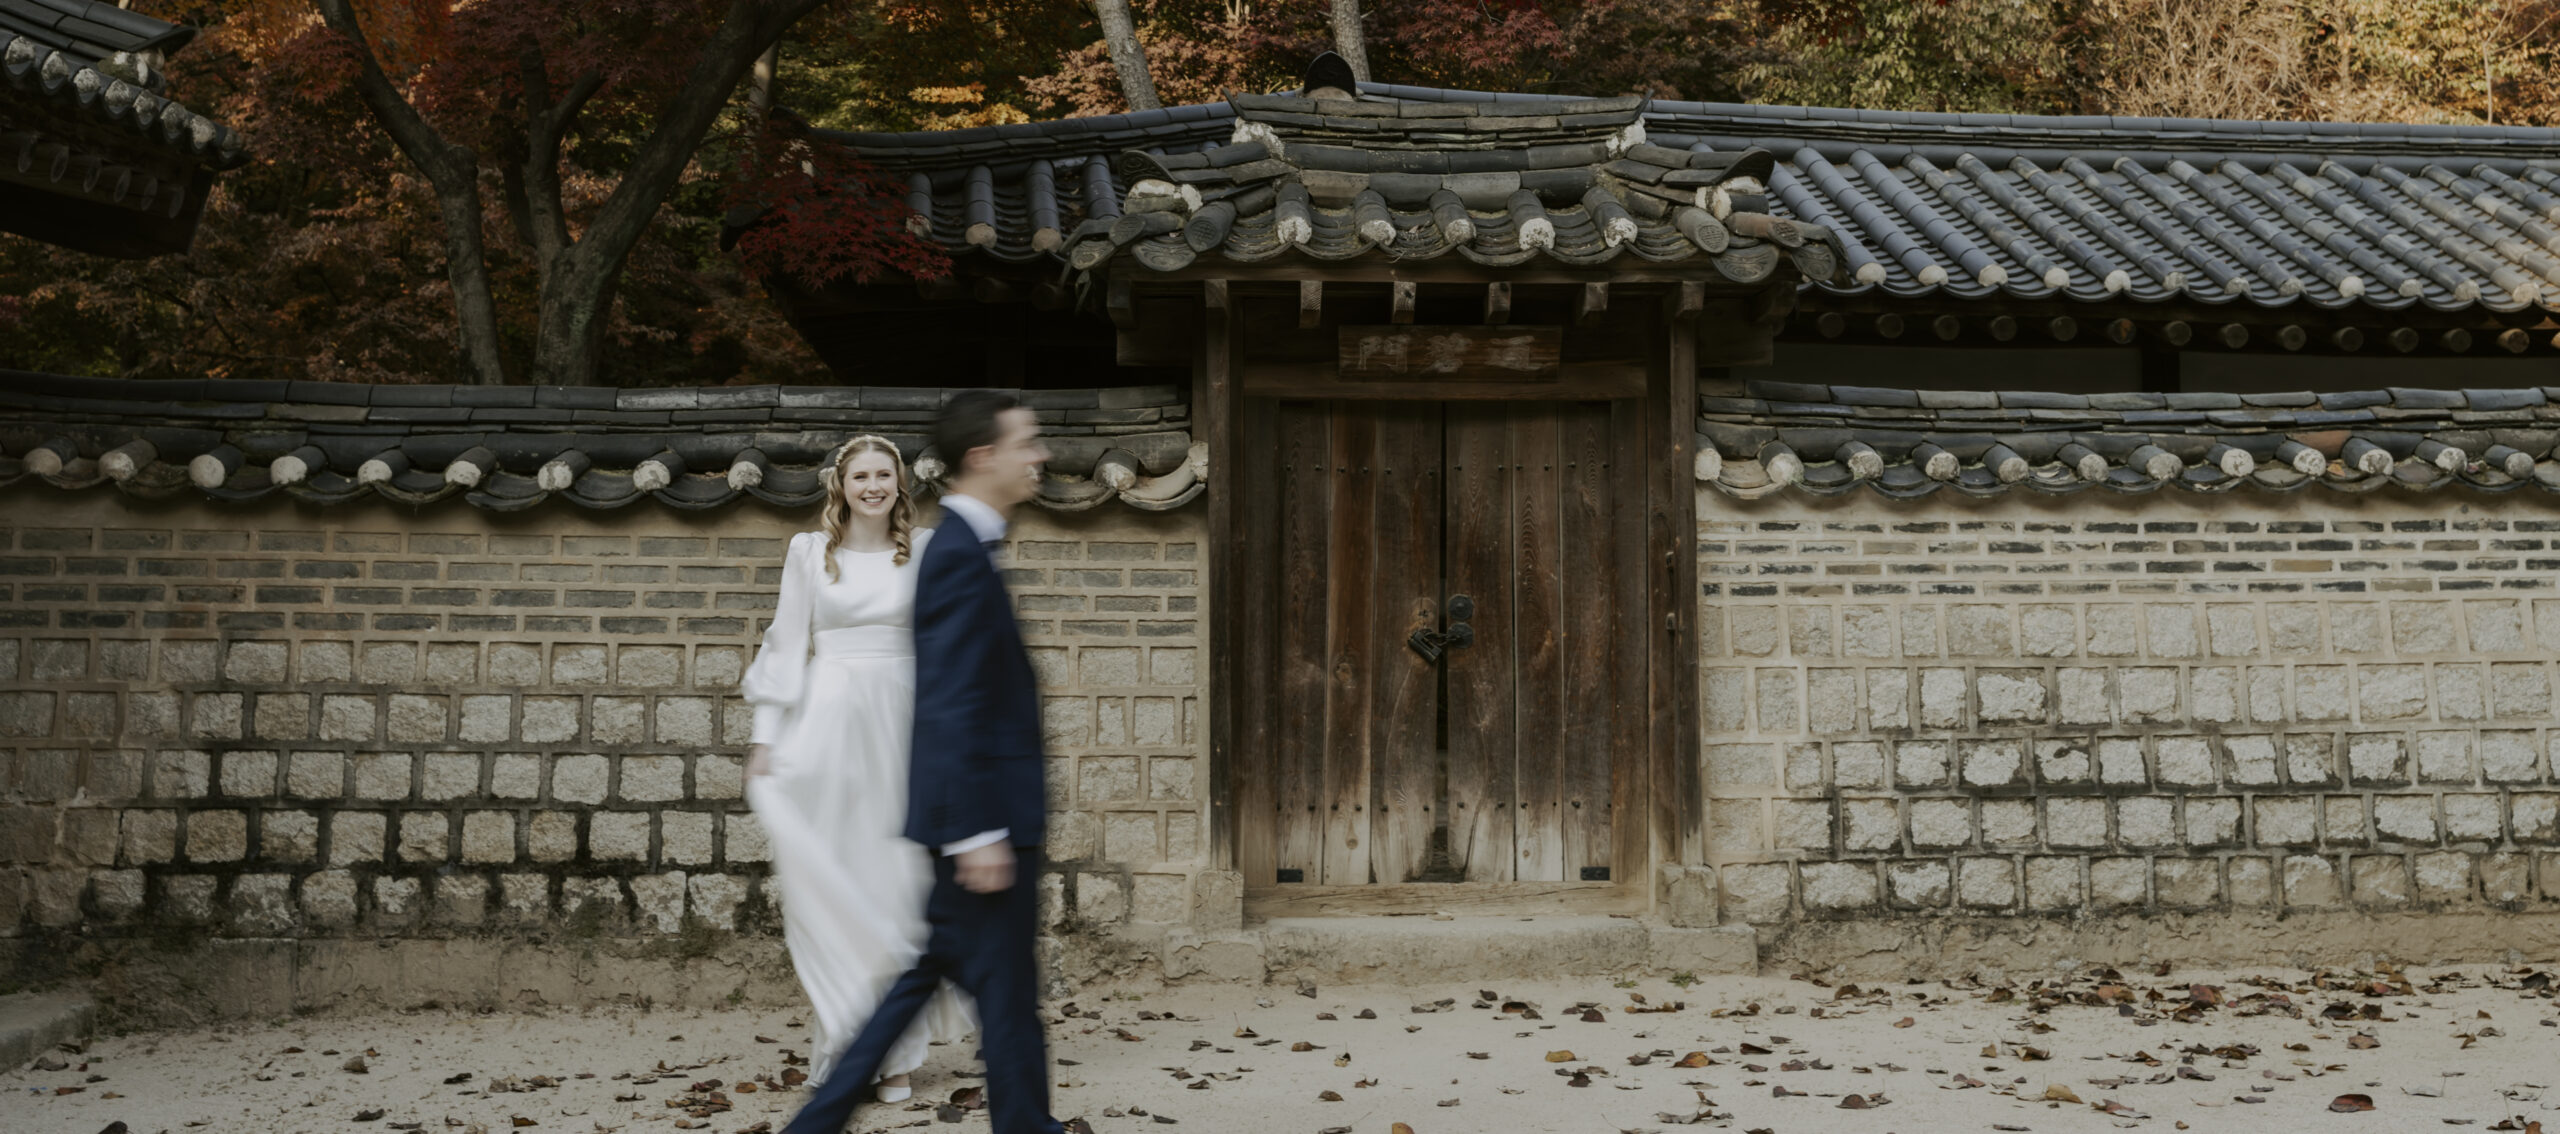 A bride and groom enjoying a Seoul elopement in front of a Korean house.